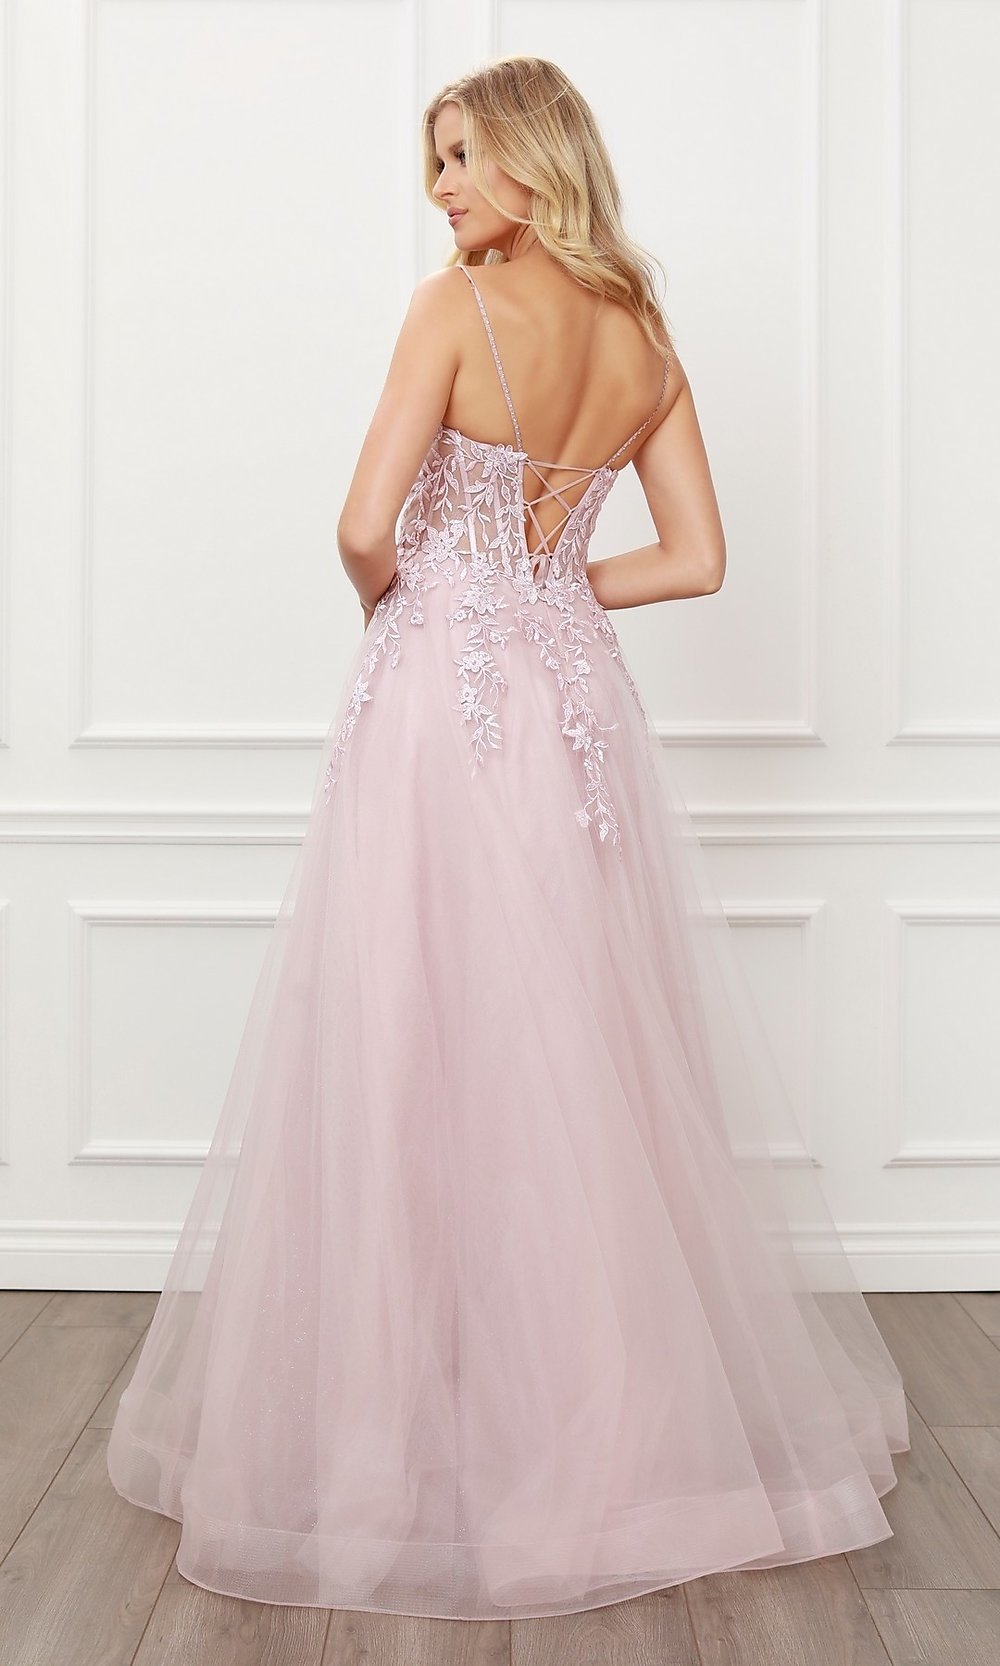 Sheer-Embroidered-Corset Long Prom Ball Gown - PromGirl